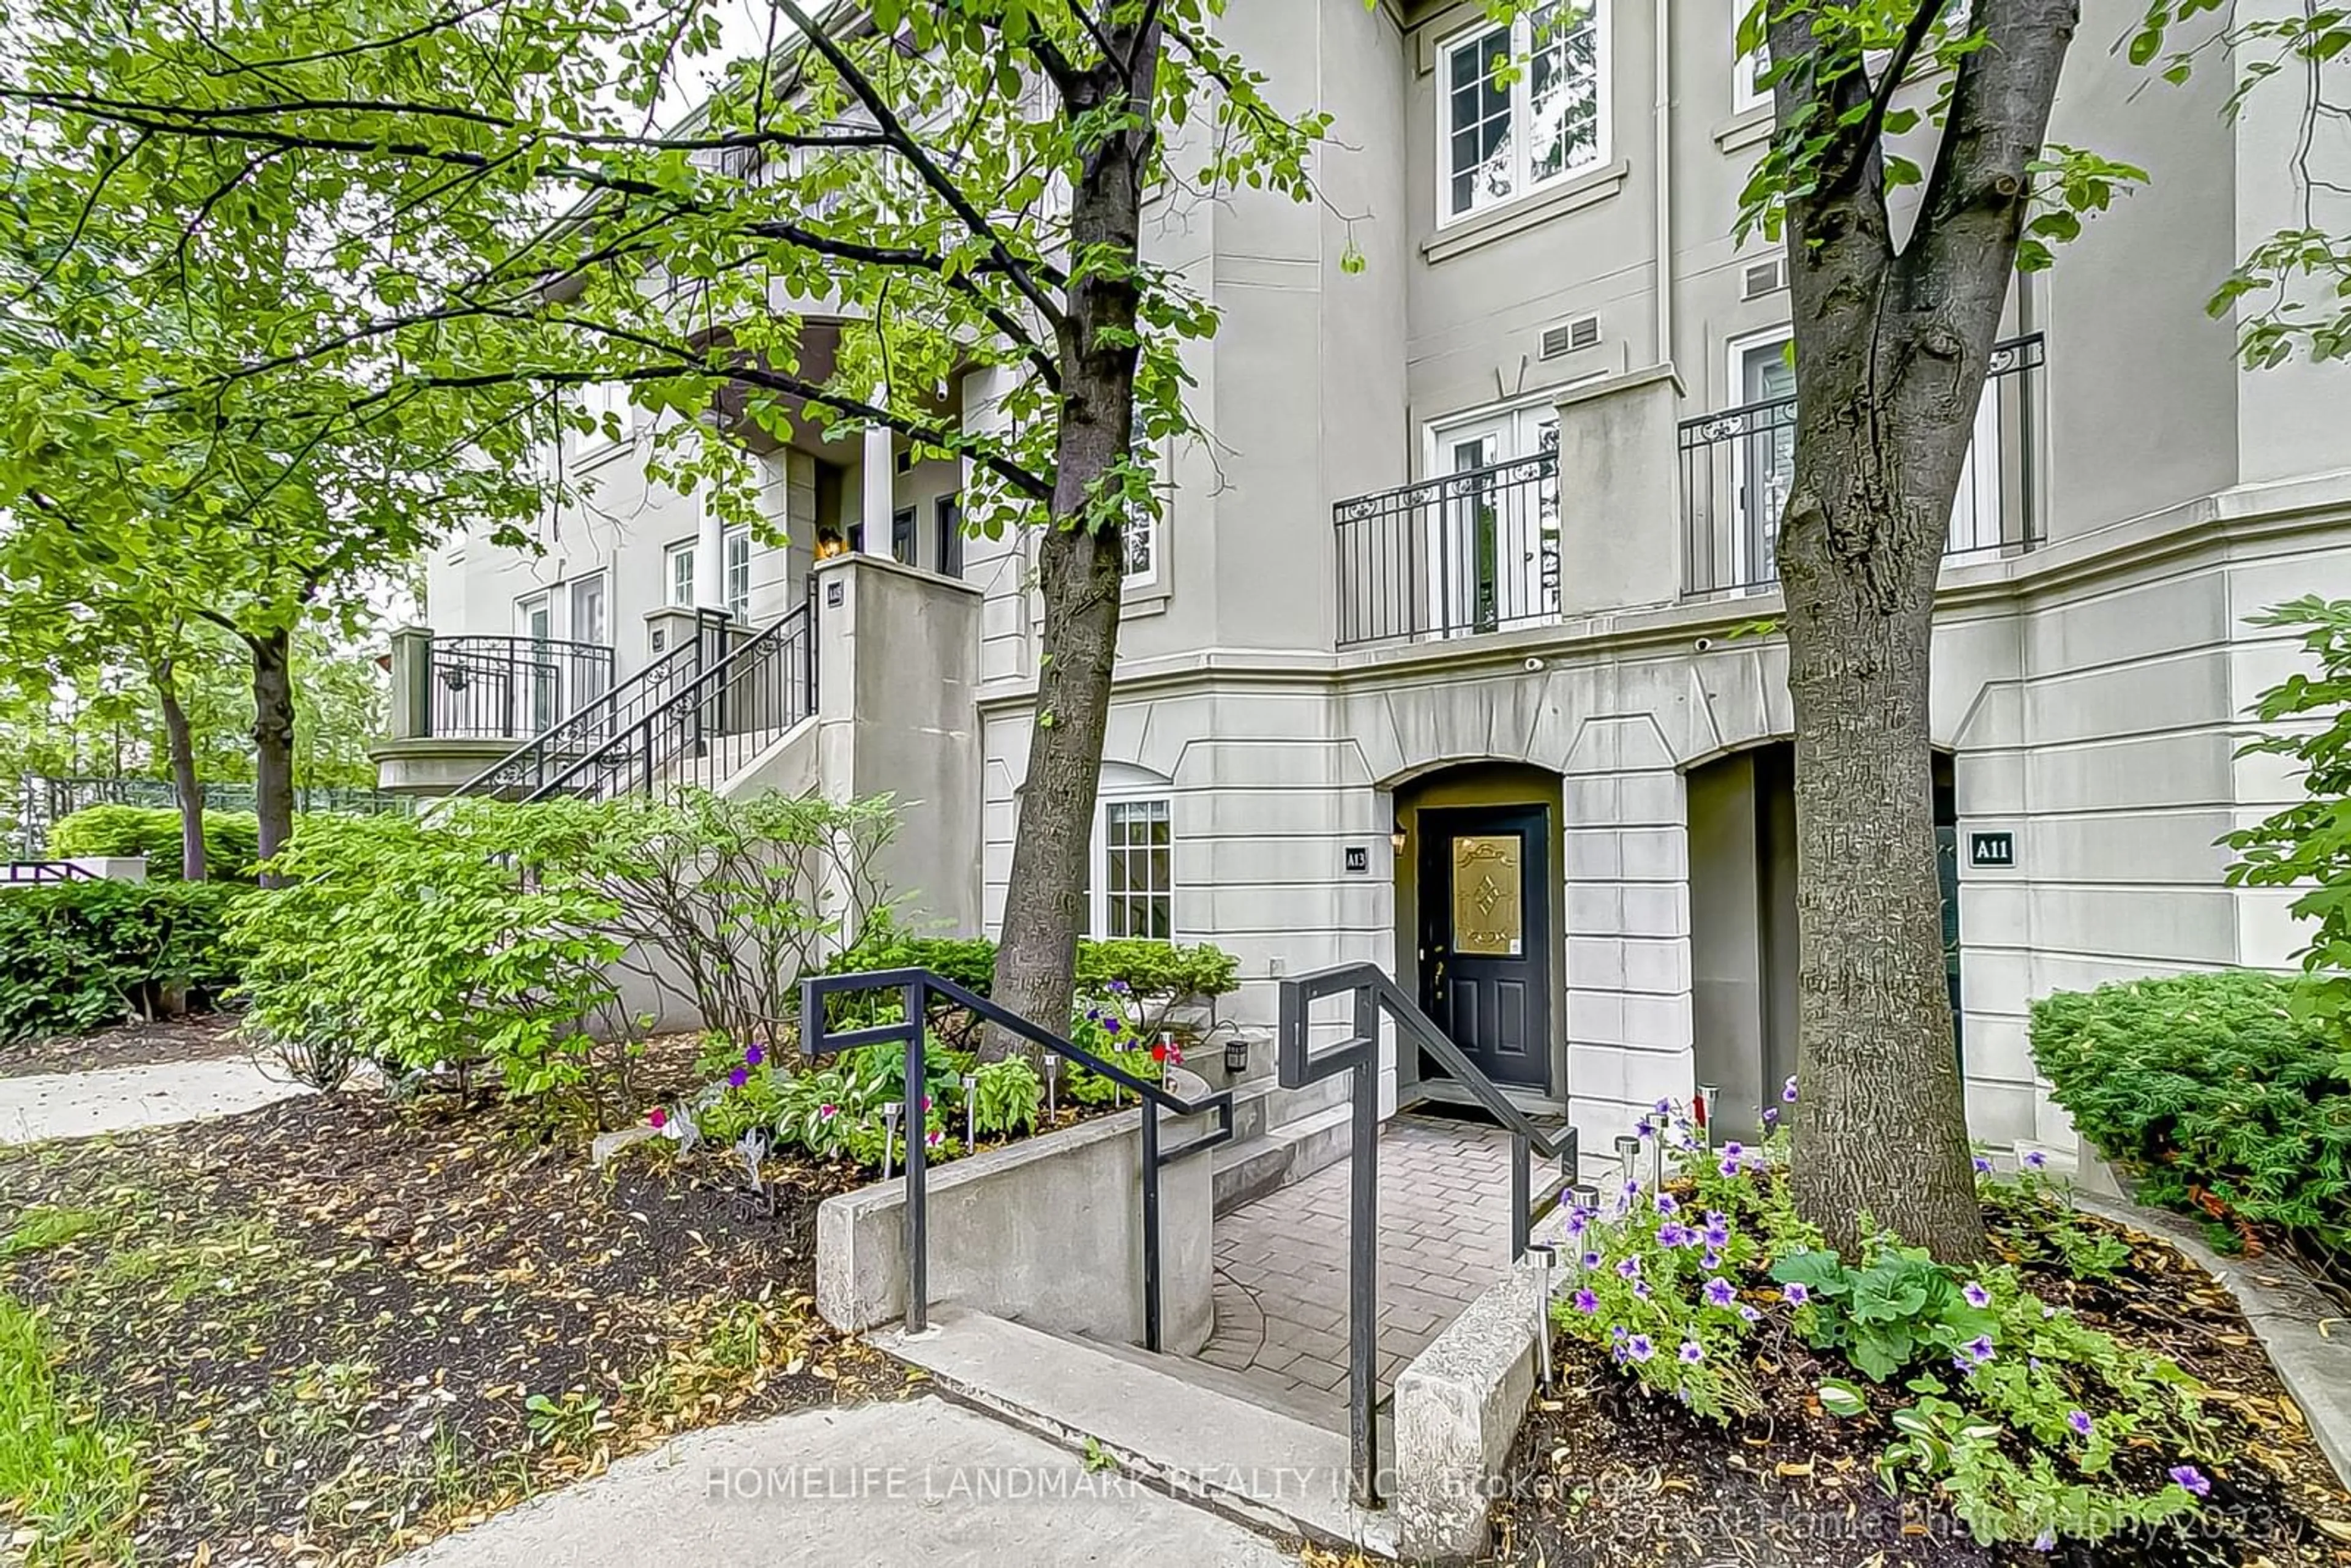 A pic from exterior of the house or condo for 108 Finch Ave #A13, Toronto Ontario M2N 6W6